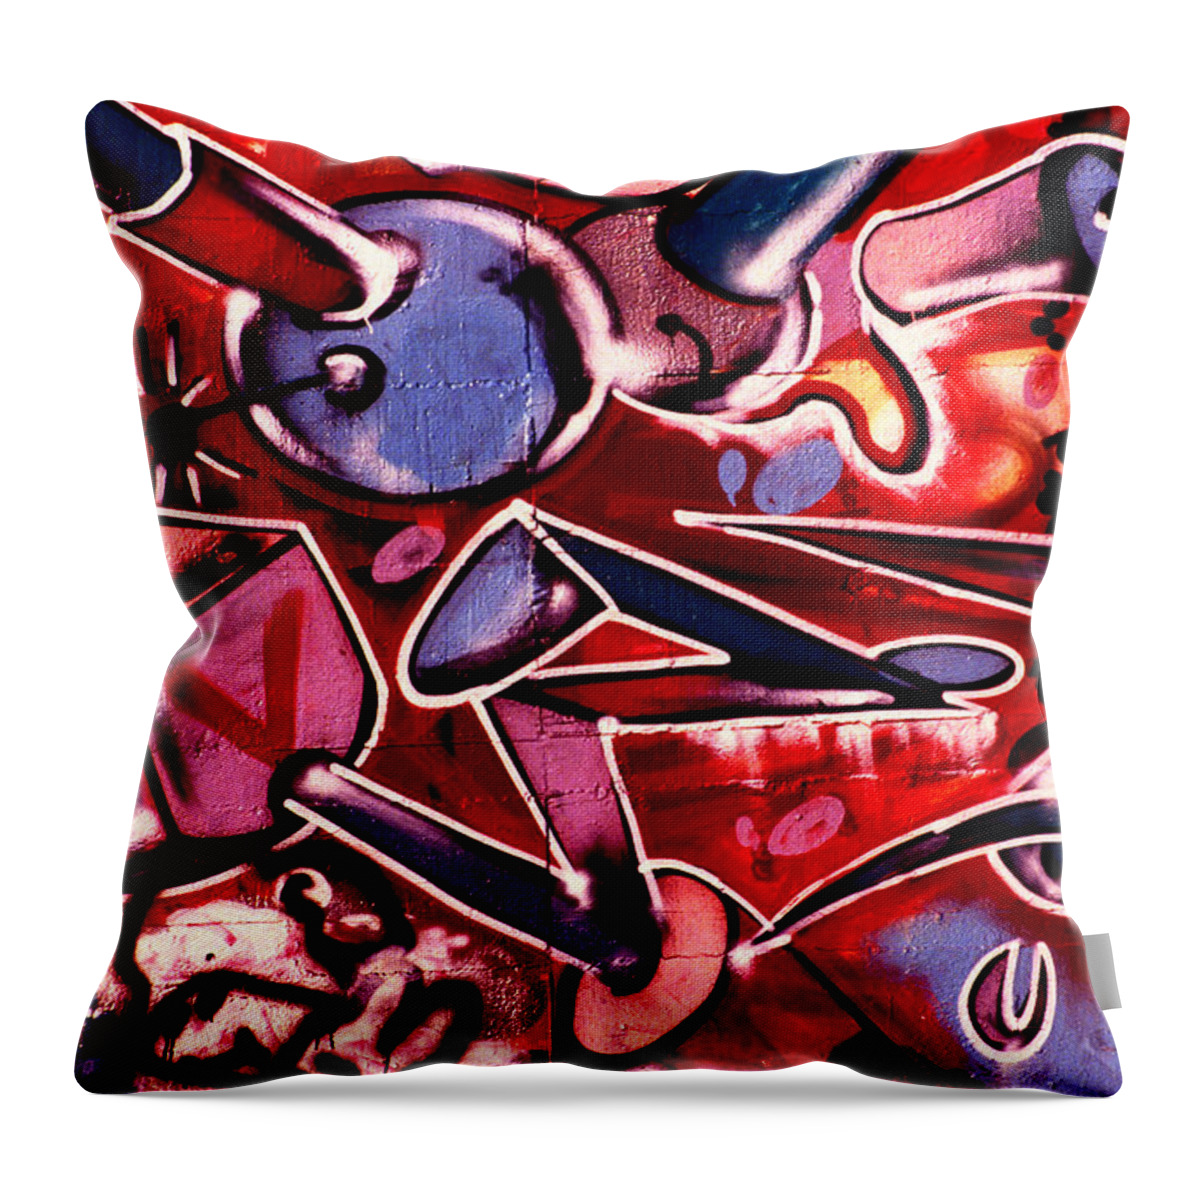 F6-g-0040 Throw Pillow featuring the photograph Graffiti Art - 040 by Paul W Faust - Impressions of Light